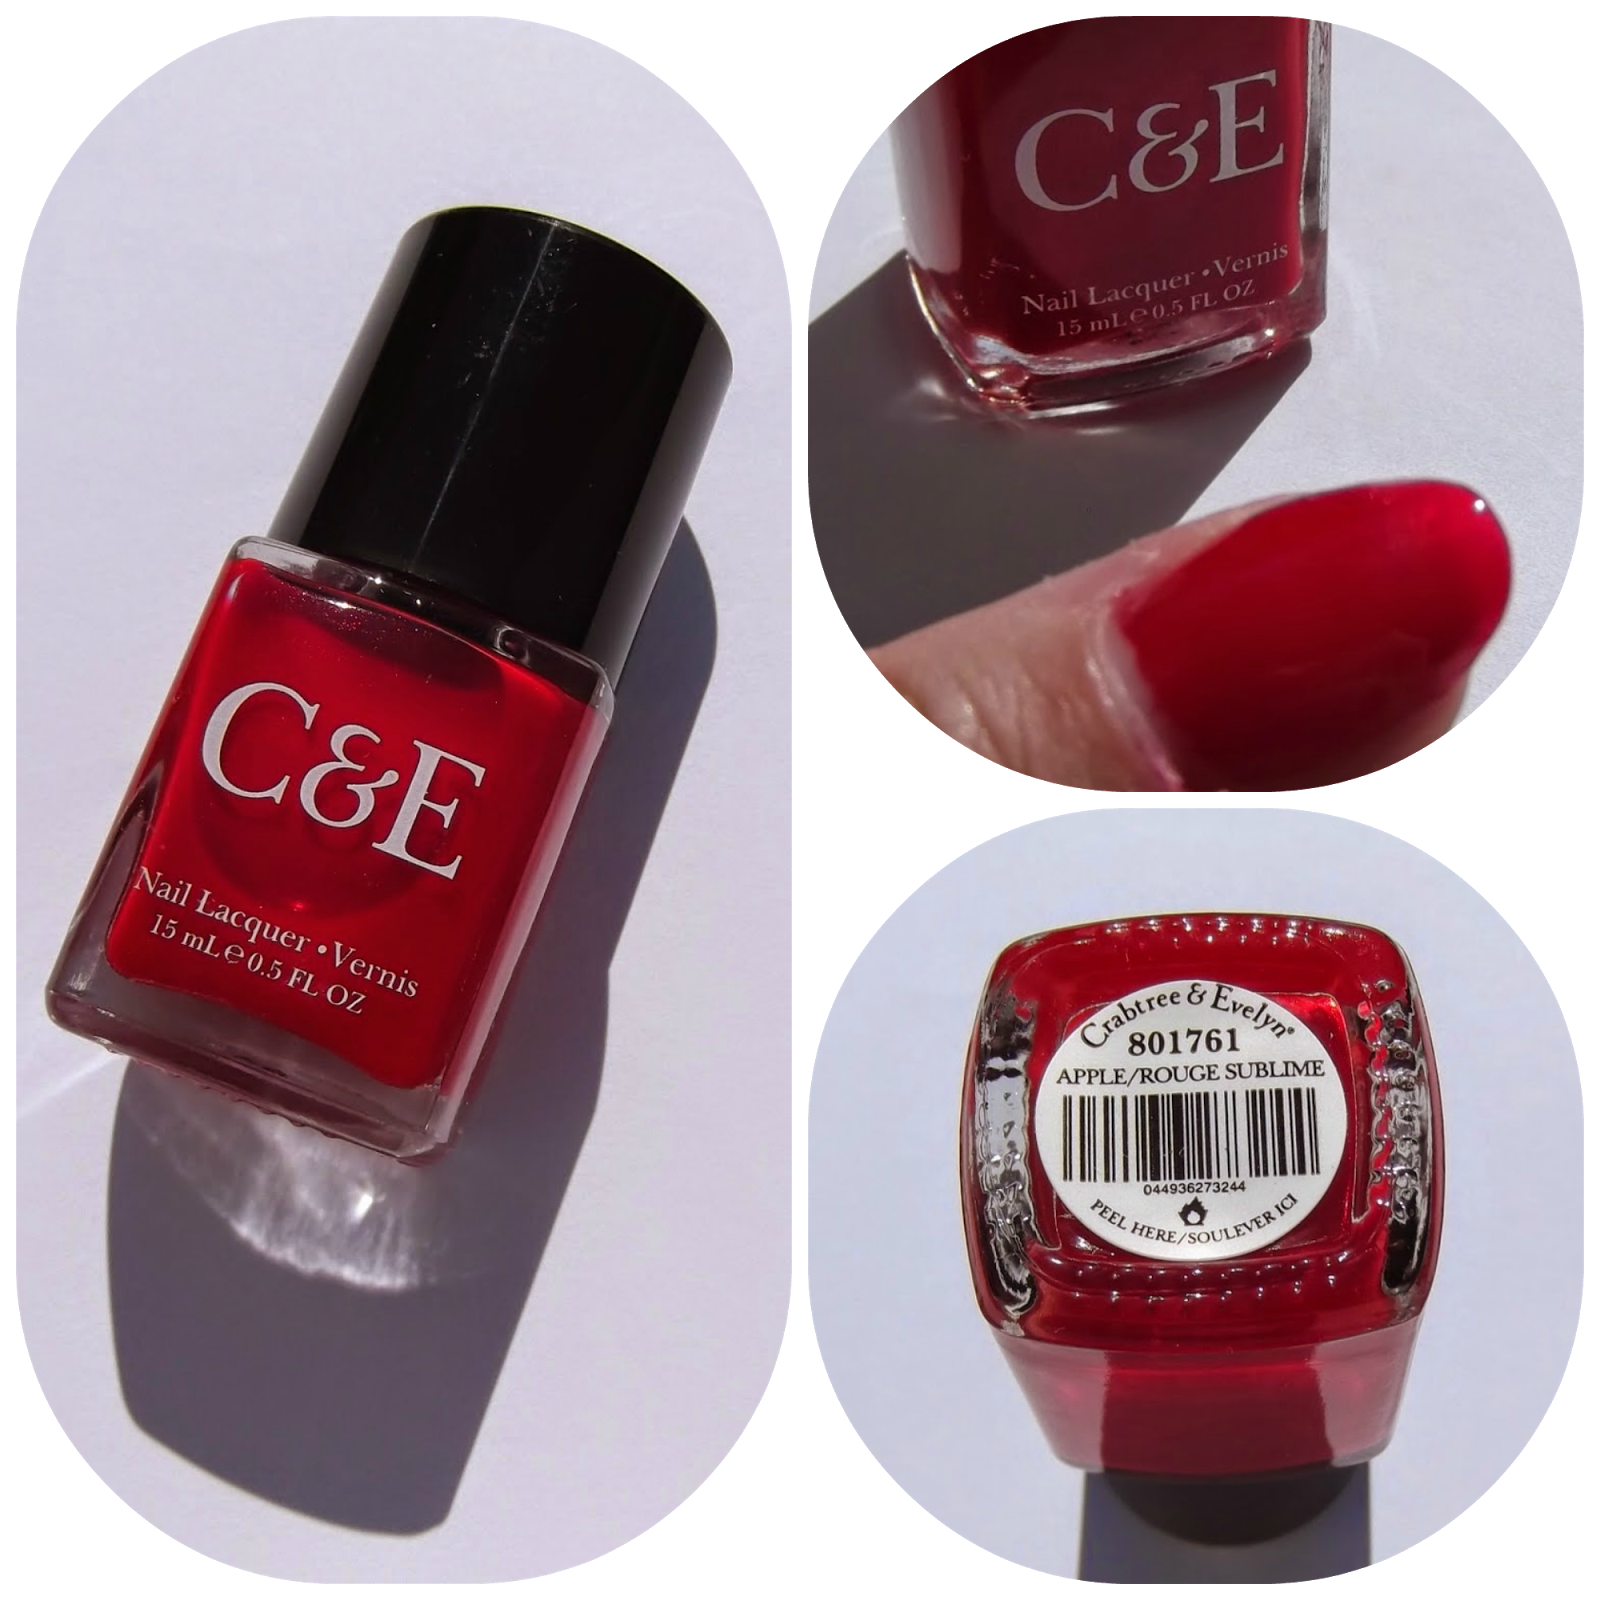 Crabtree & Evelyn Nail Varnish in 'Apple/Rouge Sublime'